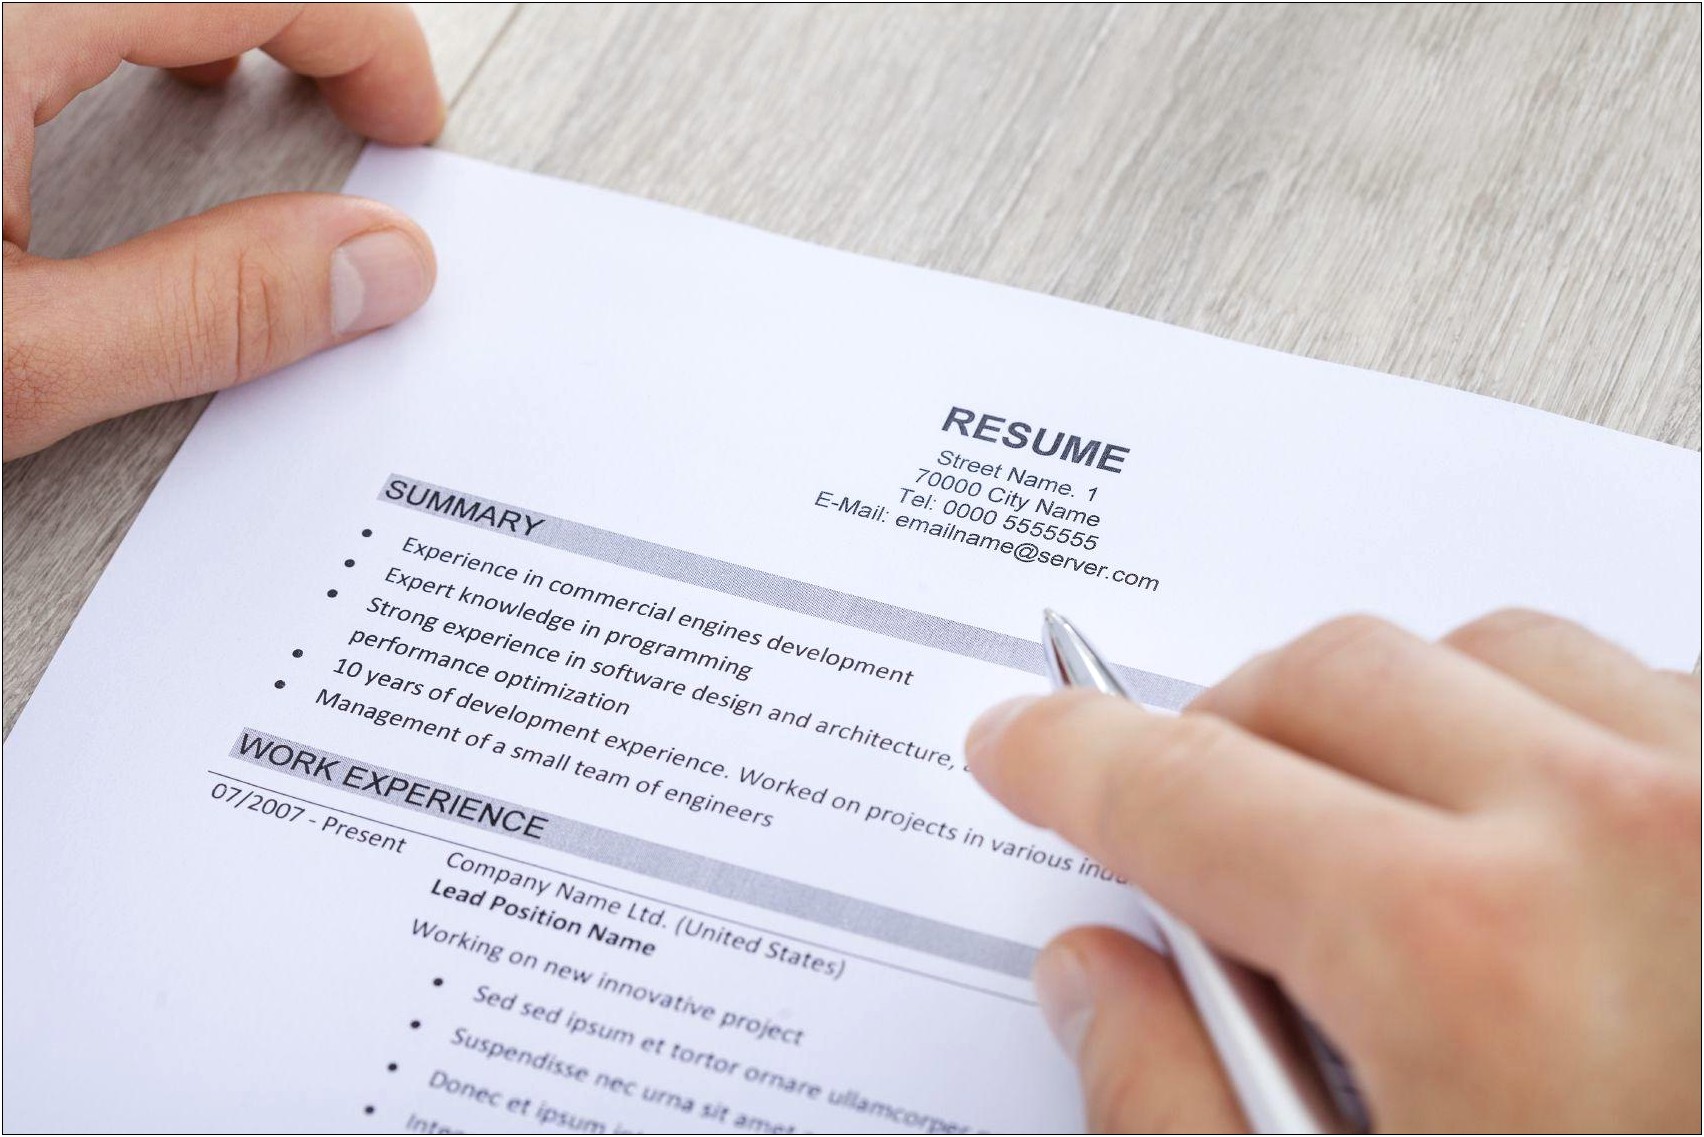 35 Words To Make Your Resume Stand Out